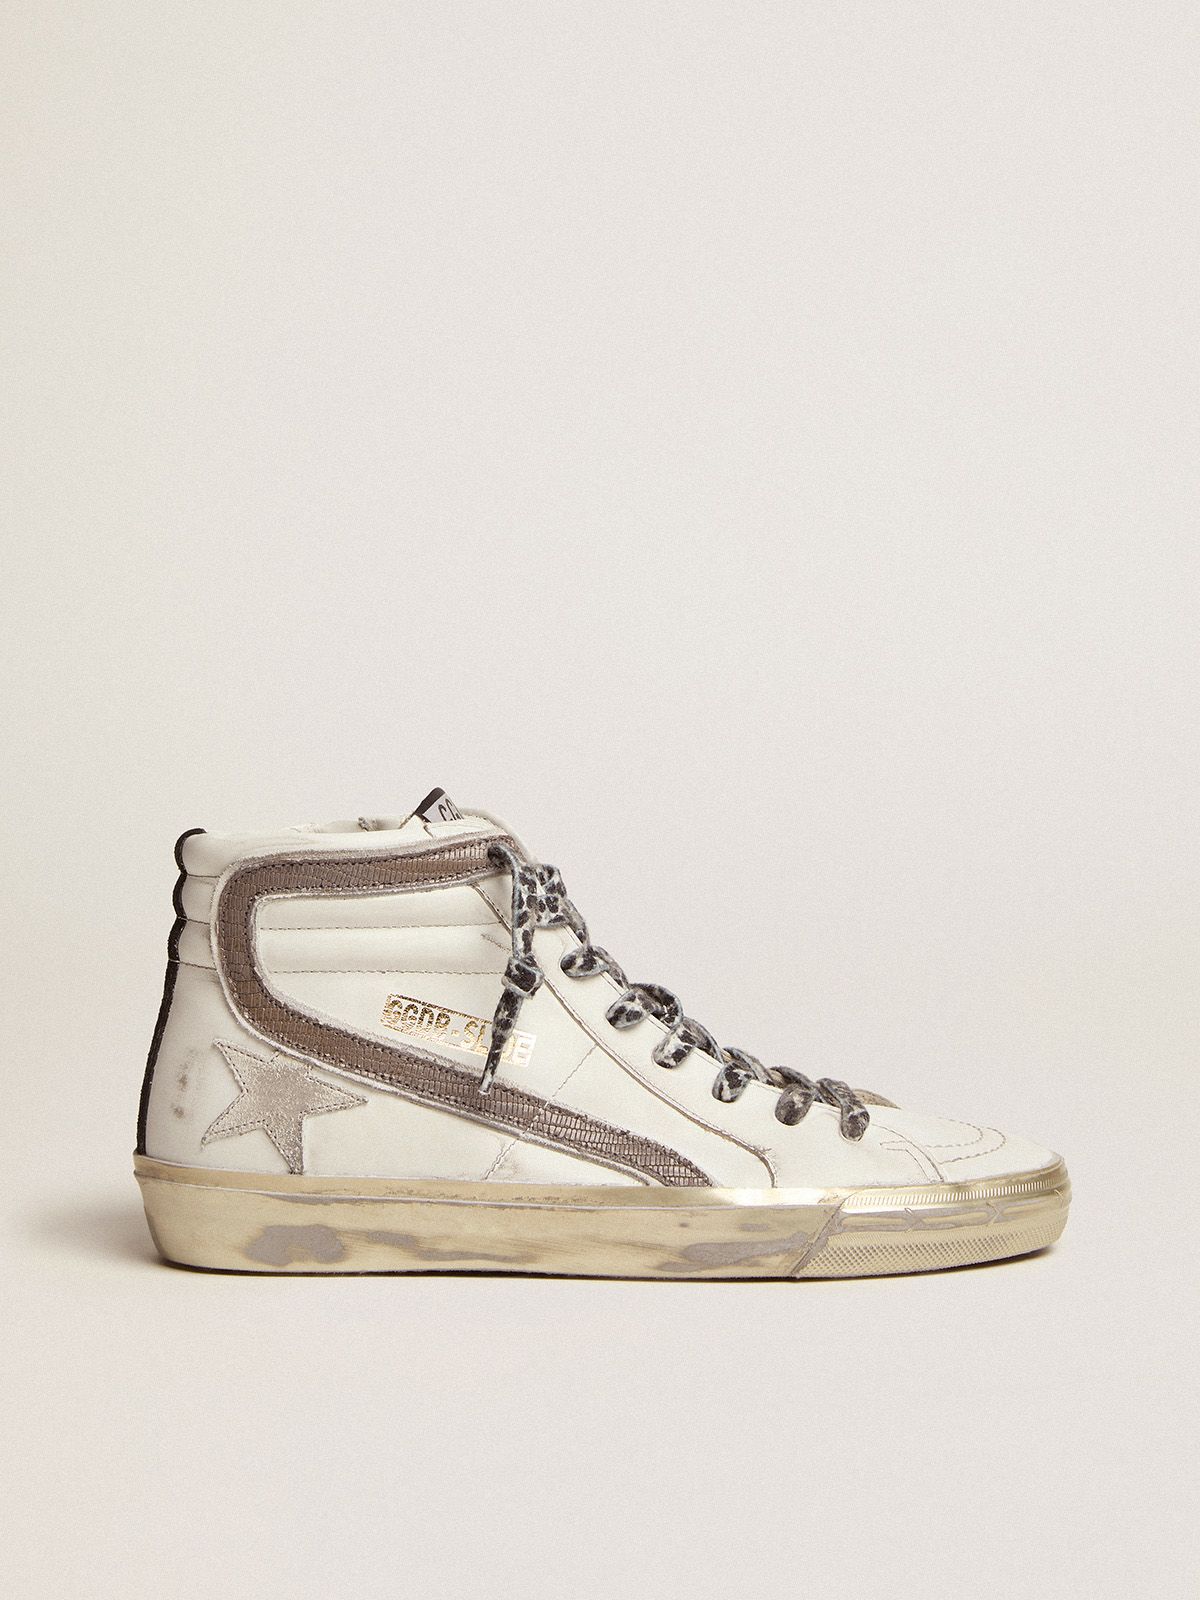 Golden Goose Bambina Slide sneakers with white suede star and dove-gray lizard-print leather flash